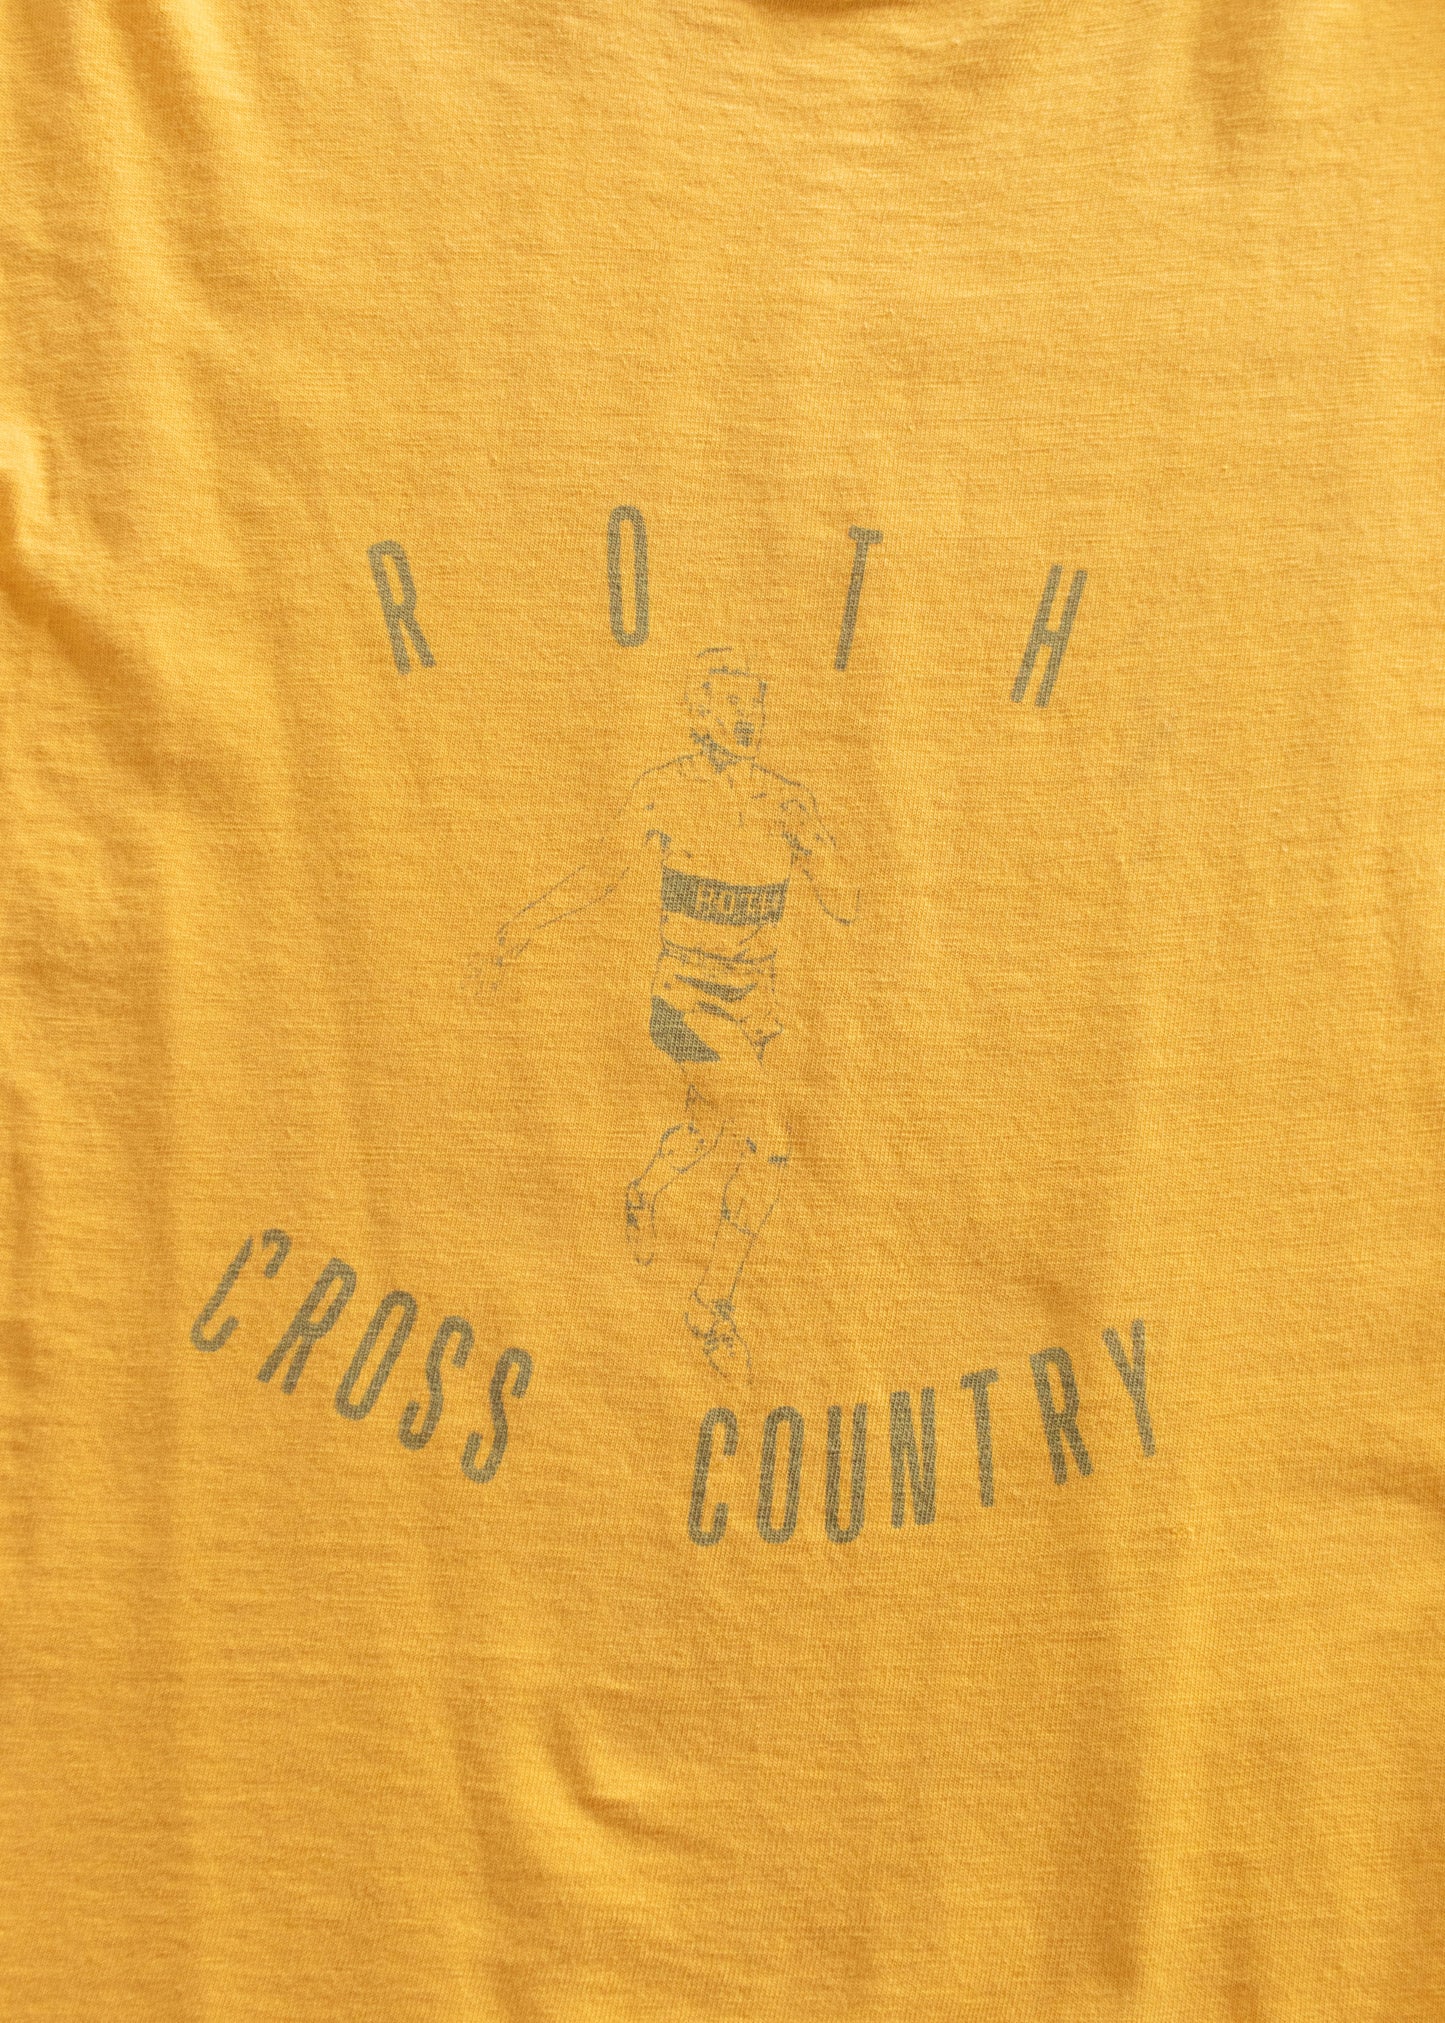 1980s Downerwear Roth Cross Country T-Shirt Size 2XS/XS